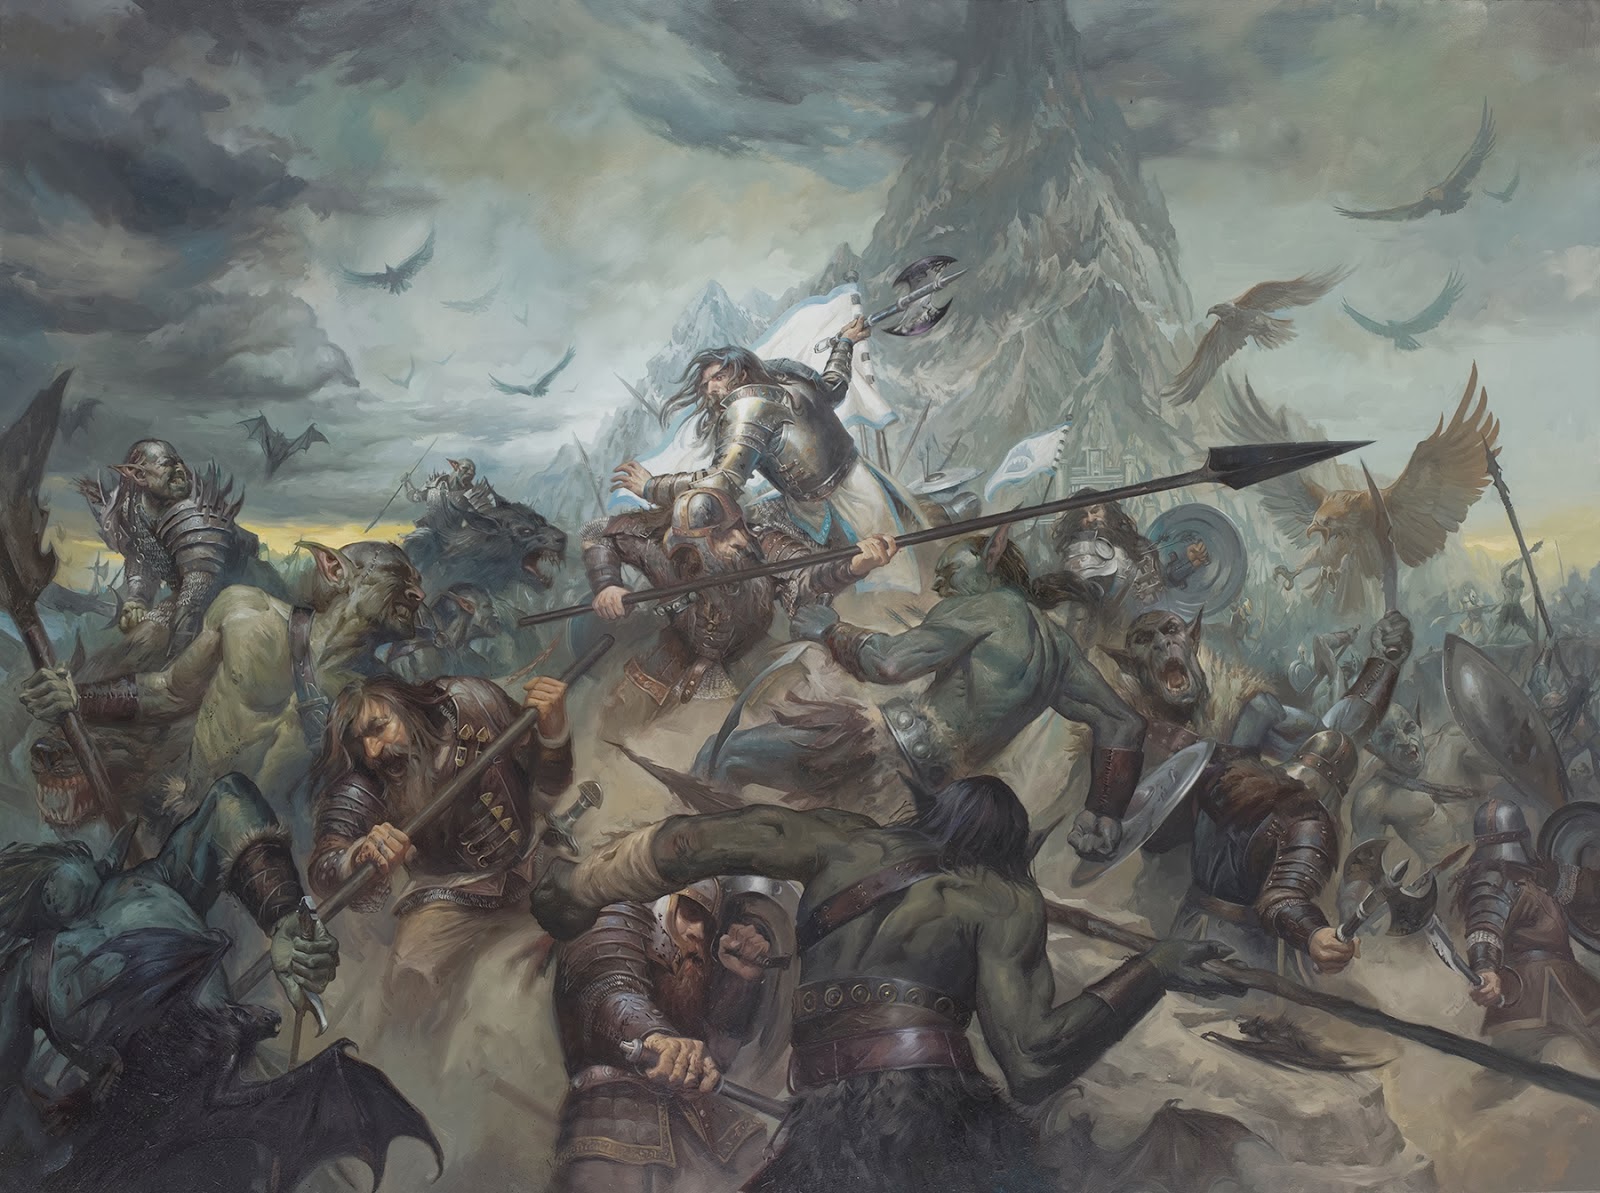 Movie The Hobbit: The Battle of the Five Armies HD Wallpaper | Background Image